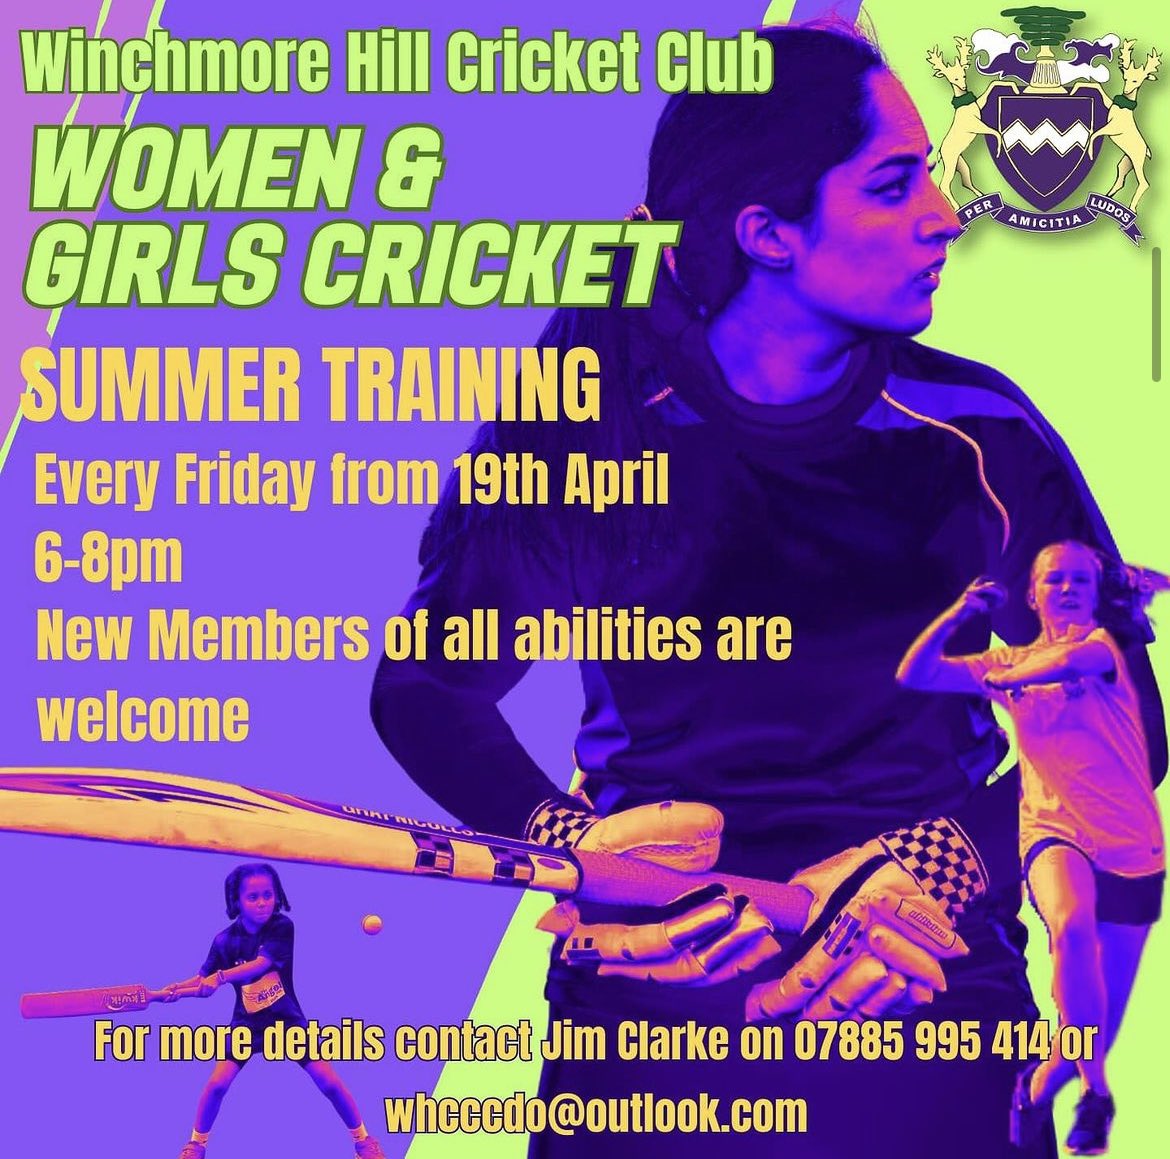 Women’s cricket is coming to the Hill this summer For more details of how to join please contact @jimmyclarke38 on 07885995414 or whcccdo@outlook.com #thisgirlscan #womenscricket #london #summer